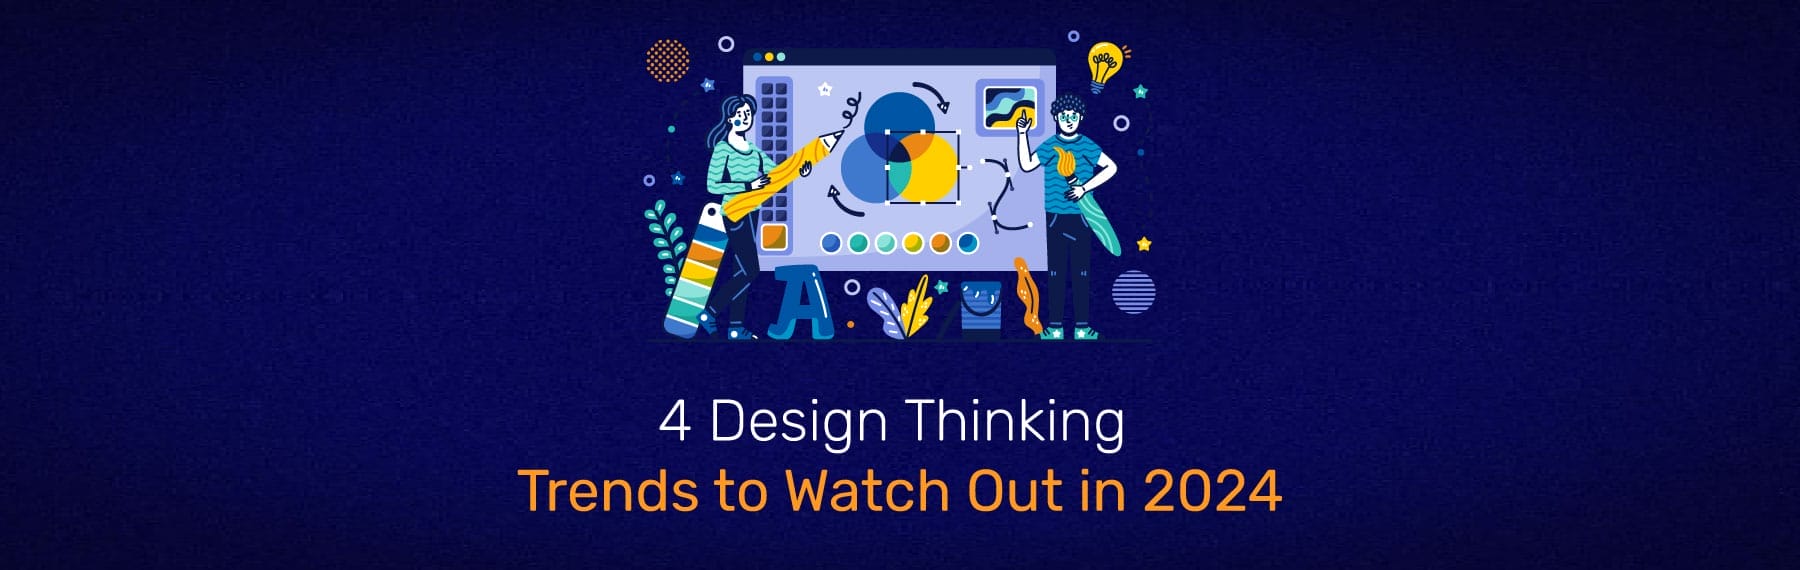 Design Thinking Trends To Watch Out In 2024 Banner ?lossy=1&ssl=1